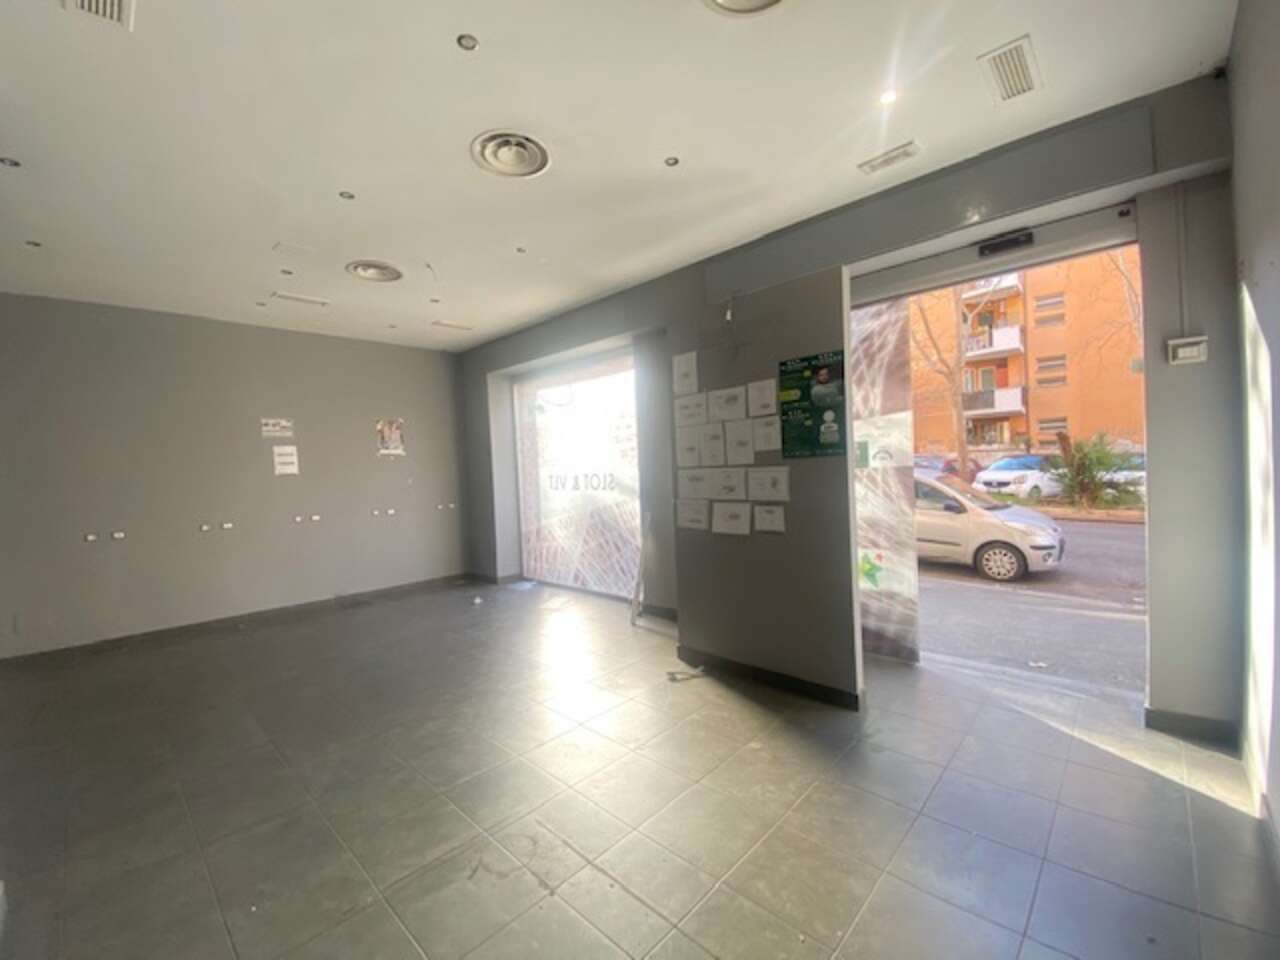 COMMERCIAL PREMISES IN THE TUSCOLAN AREA